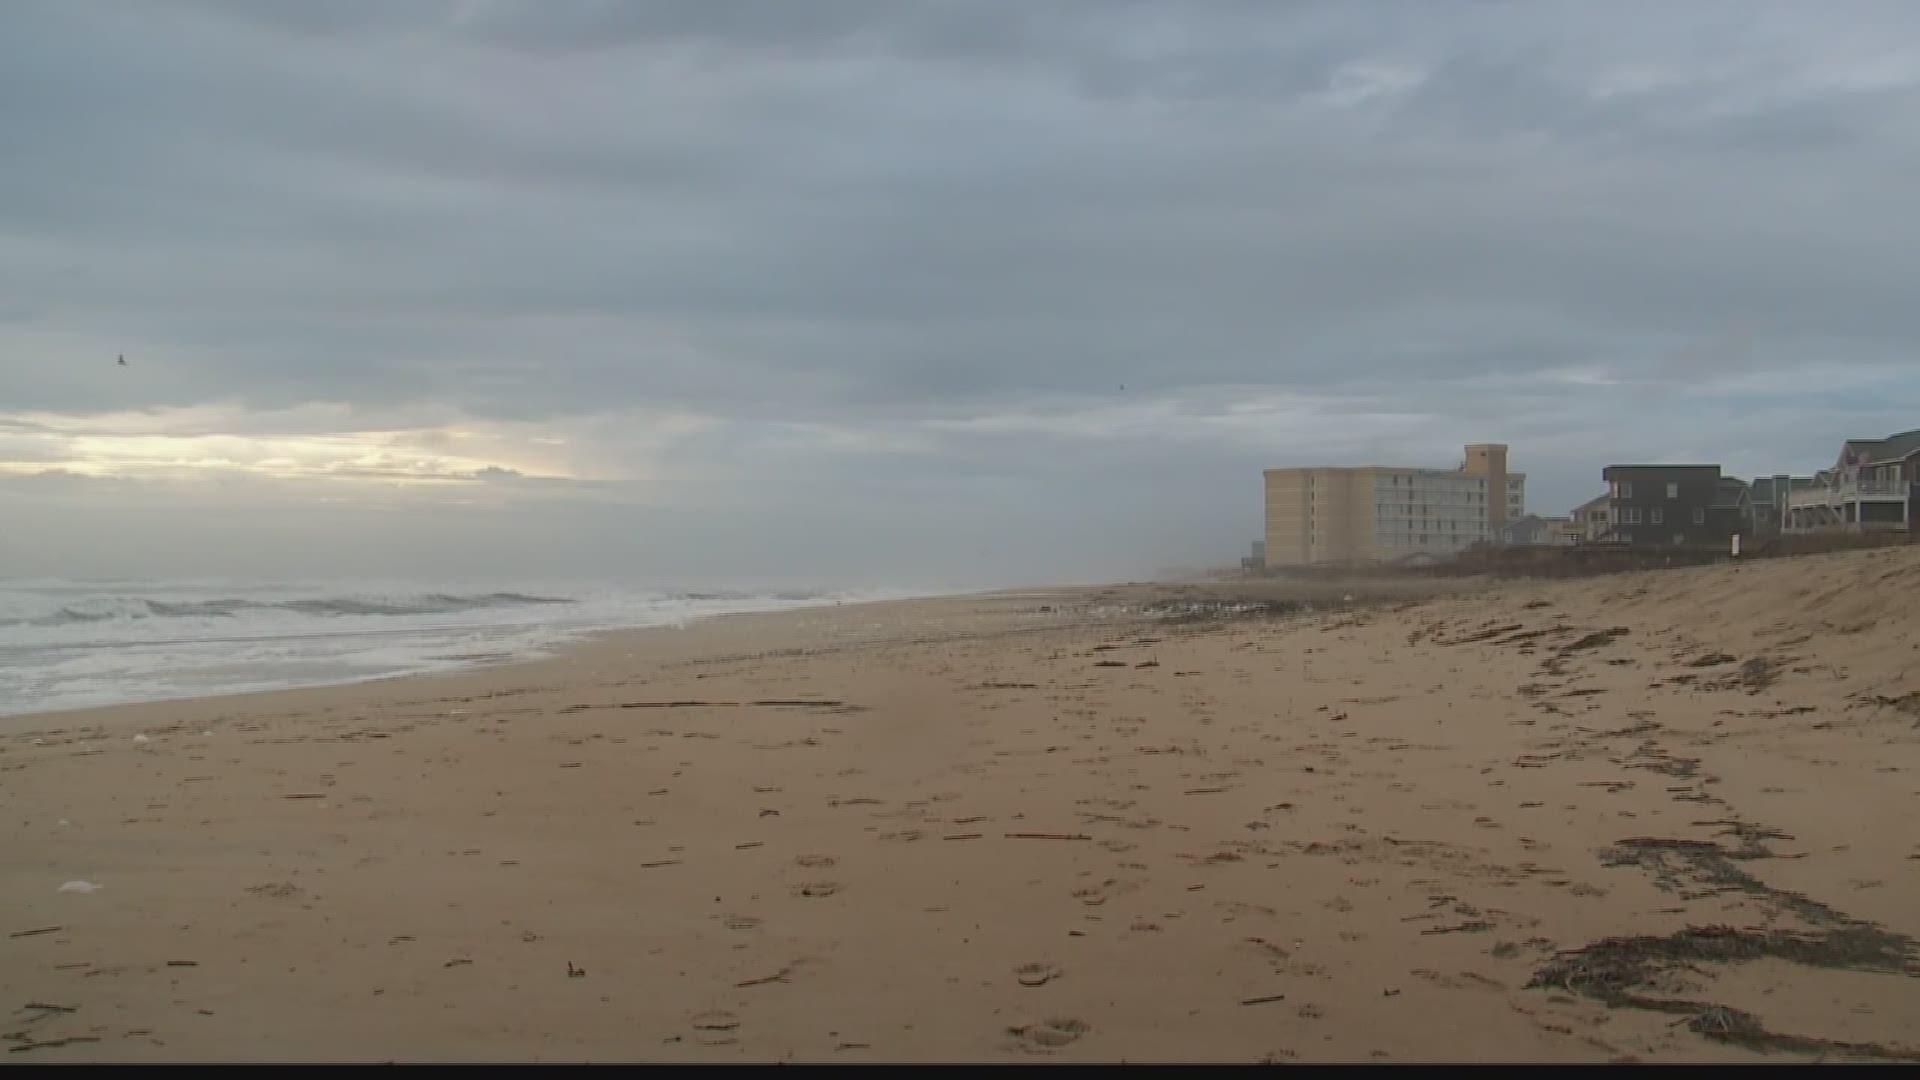 13News Now Steven Graves was in the Outer Banks where tourists evacuated ahead of Hurricane Maria.